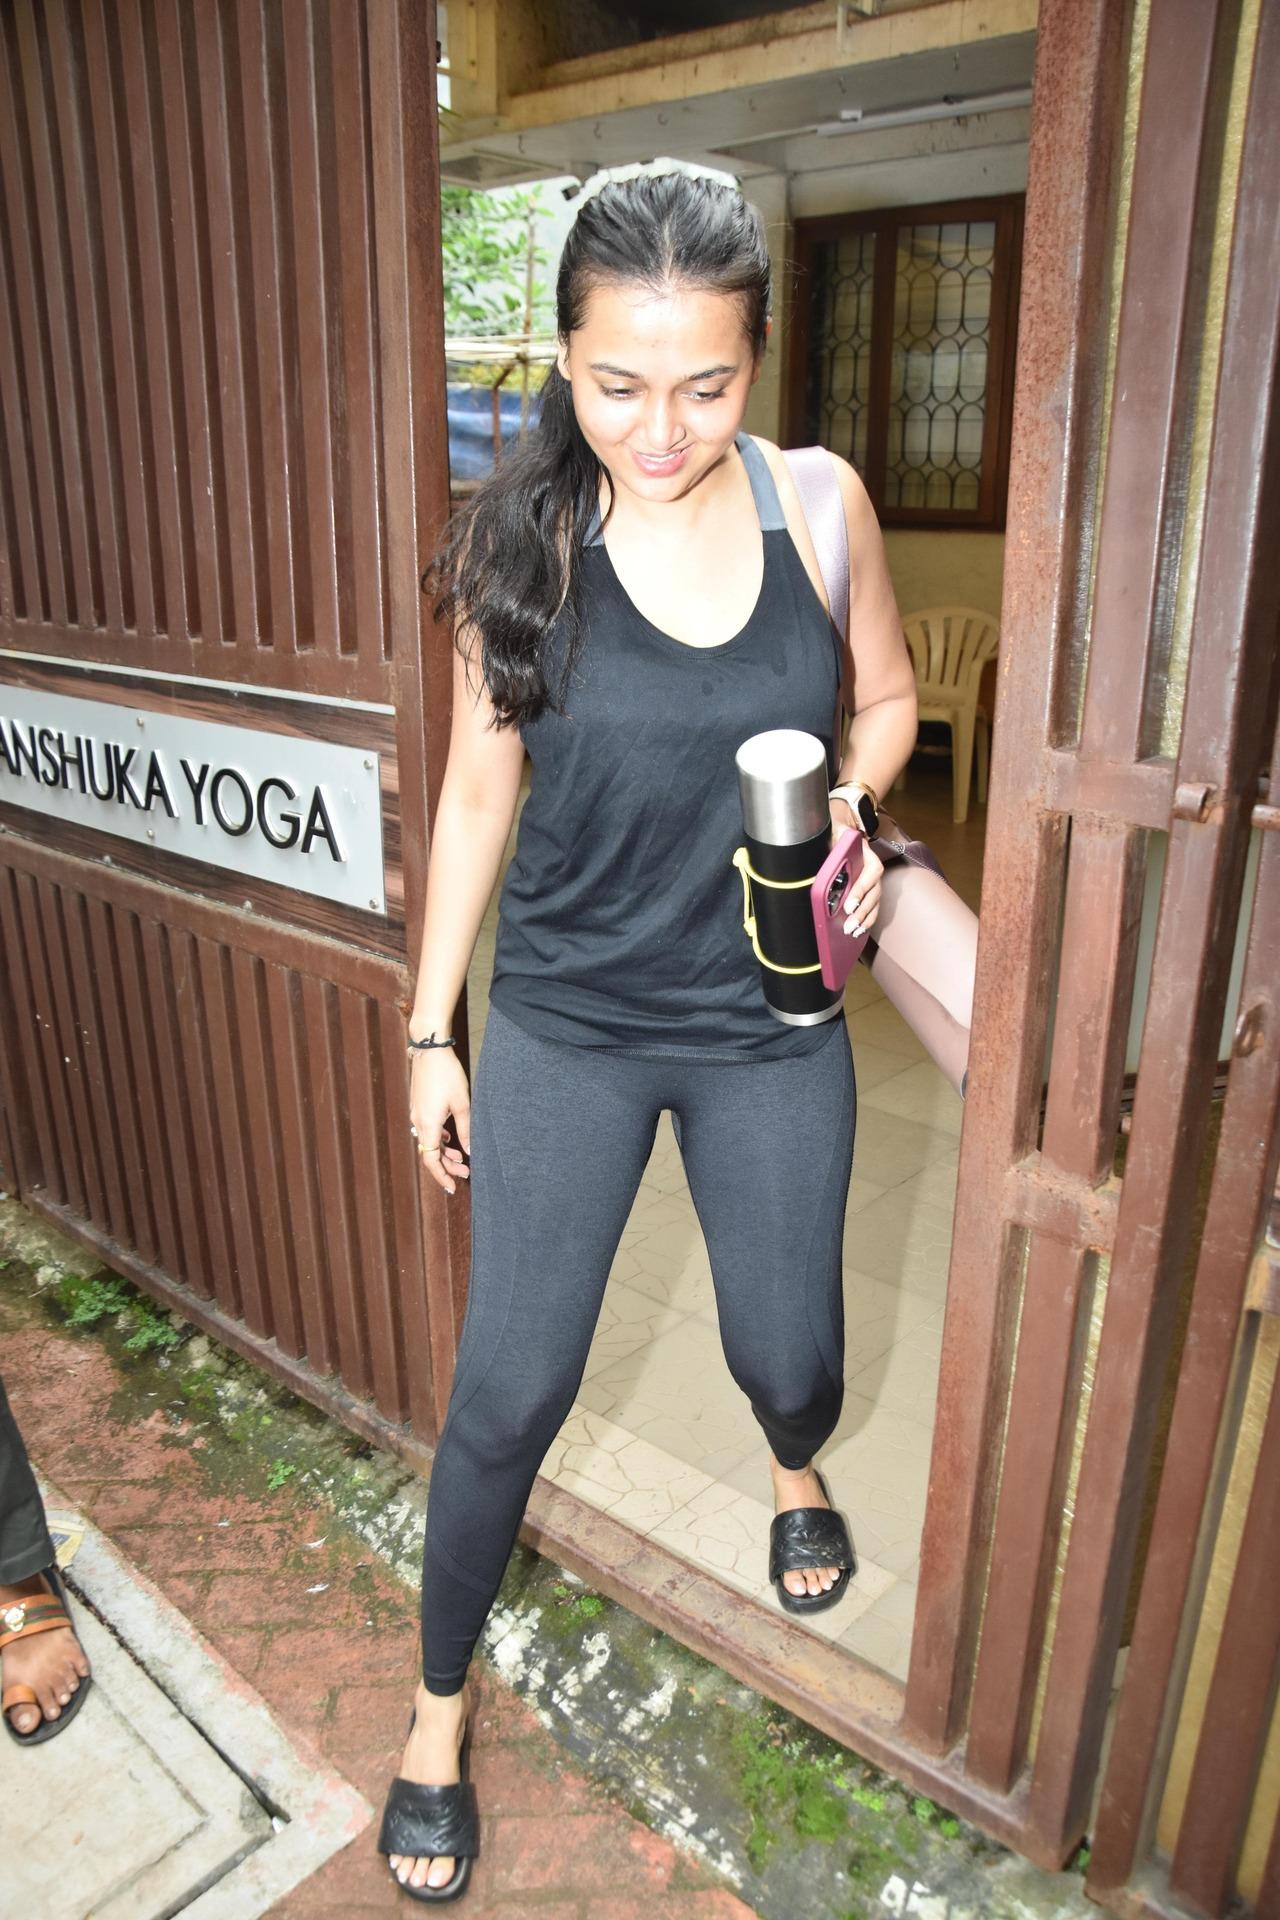 Tejasswi Prakash looked very cute as she was clicked leaving her yoga class